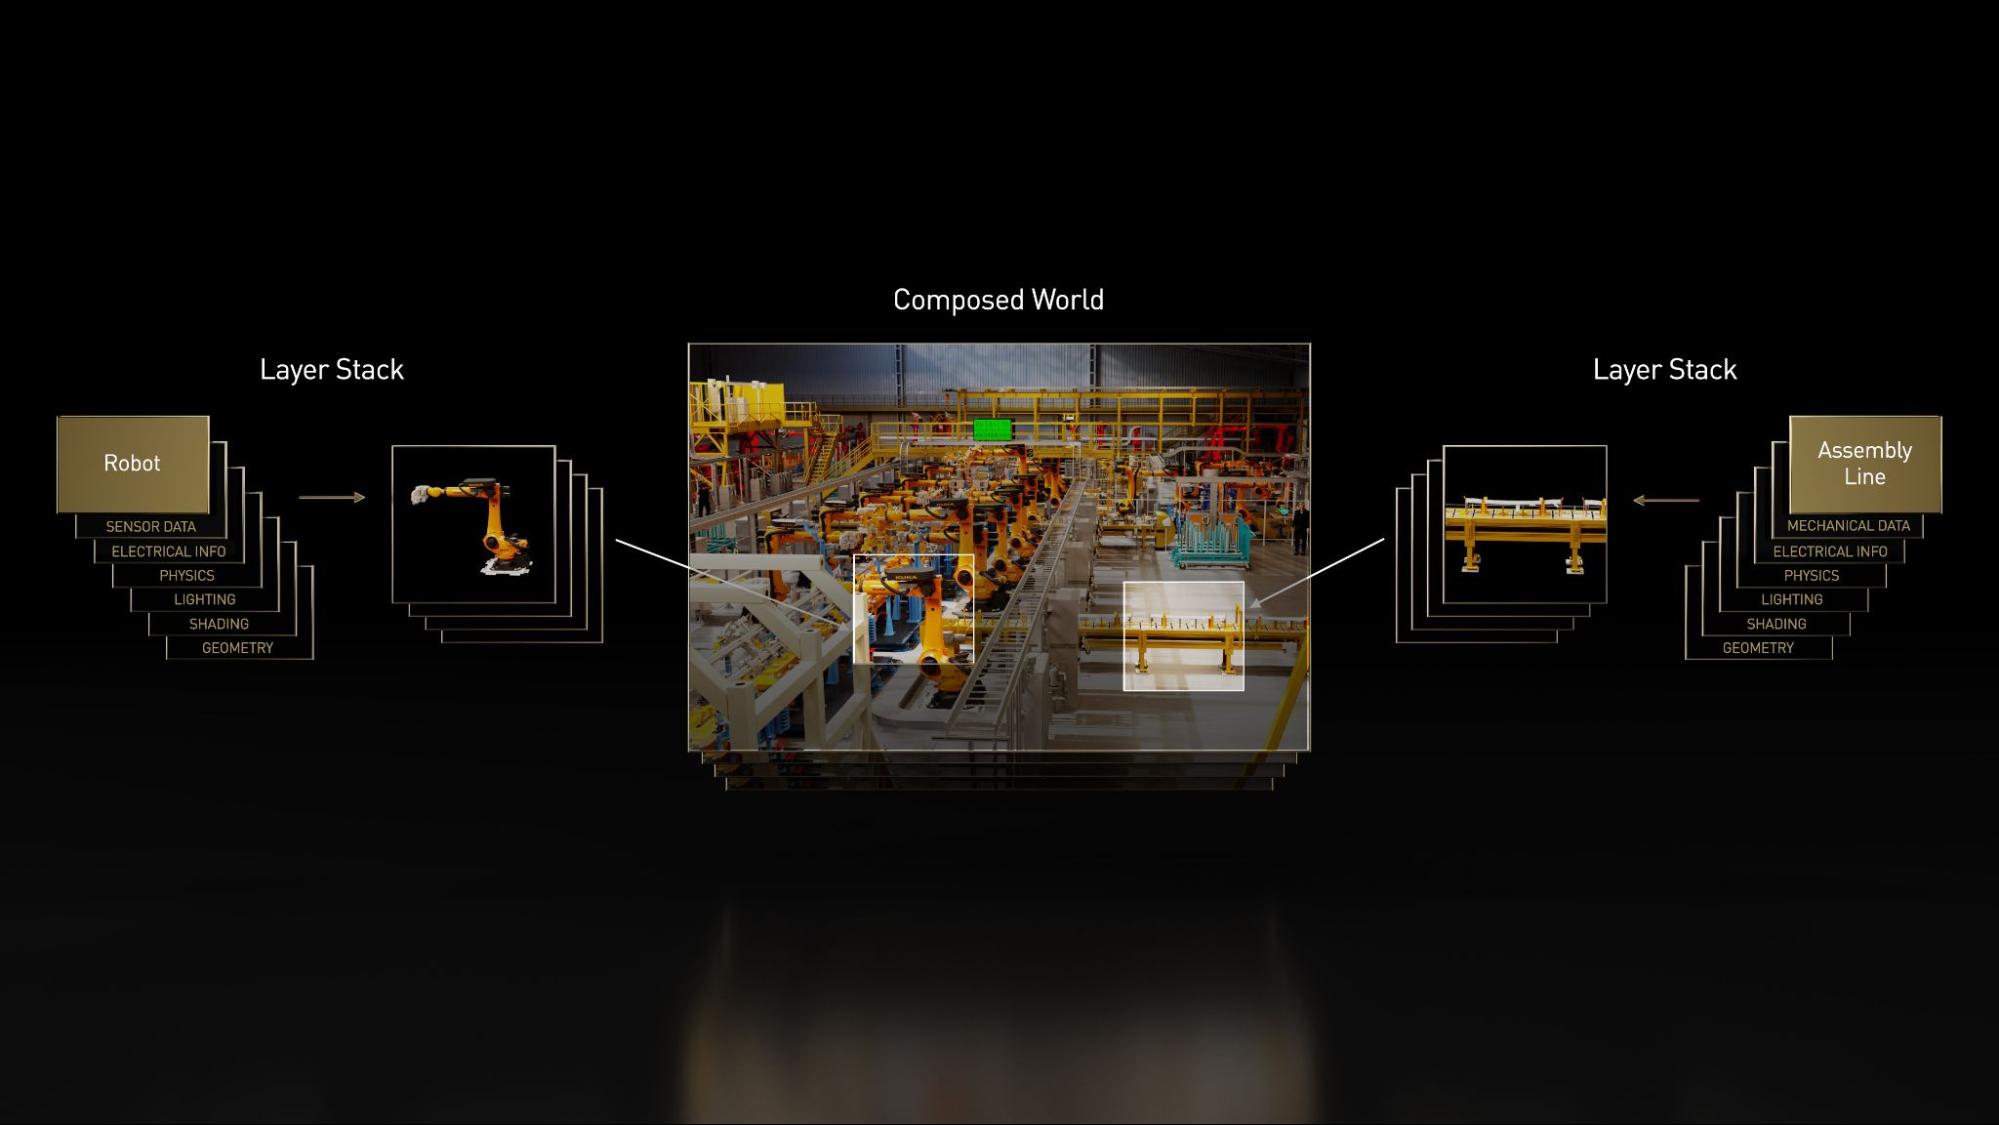 Image showing the layered workflow for a factory assembly line simulation.